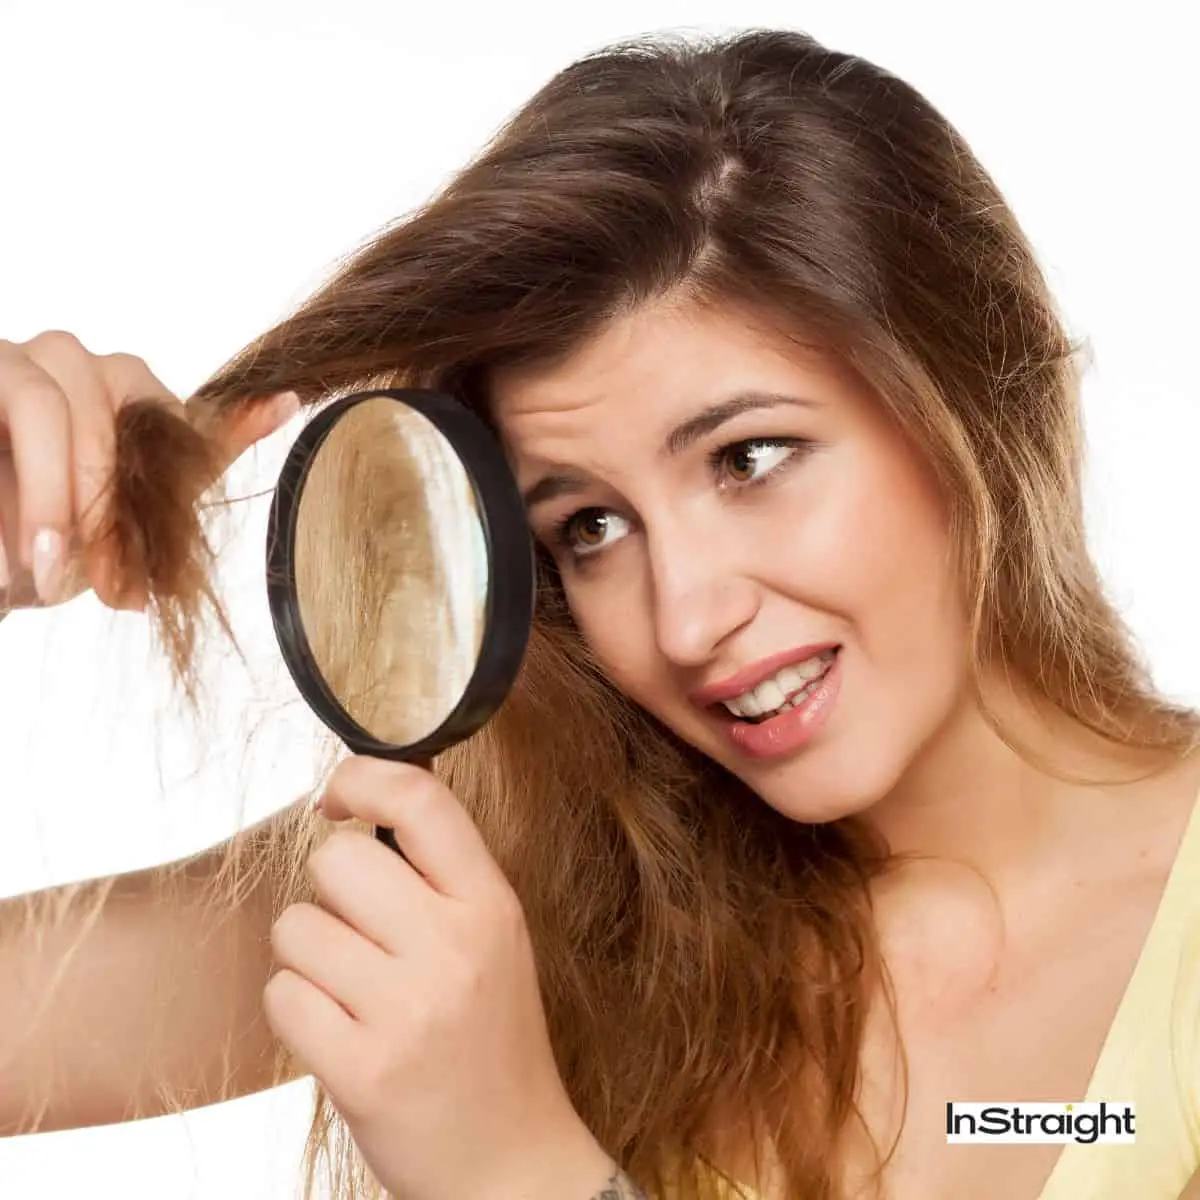 women checking whether heat-damaged hair vs healthy hair she is